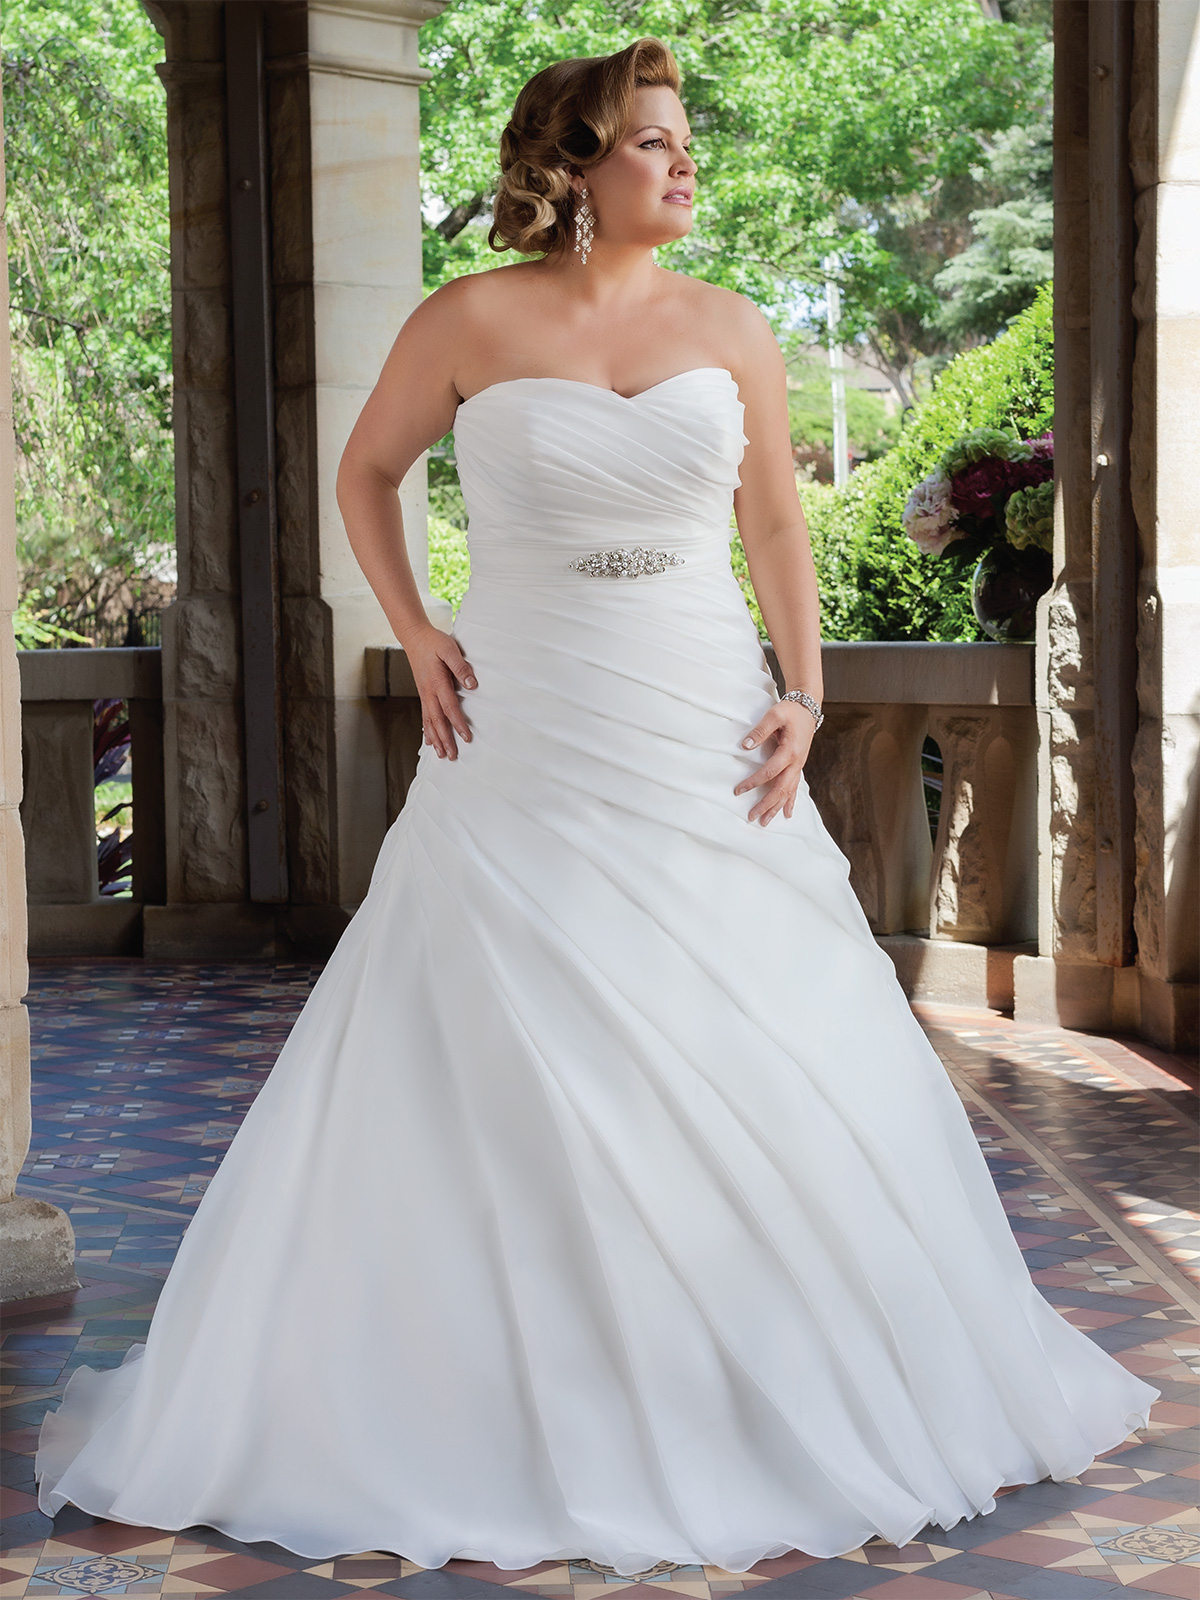 Elegant Wedding Dresses For Plus Size Top 10 Find The Perfect Venue For Your Special Wedding Day 5116